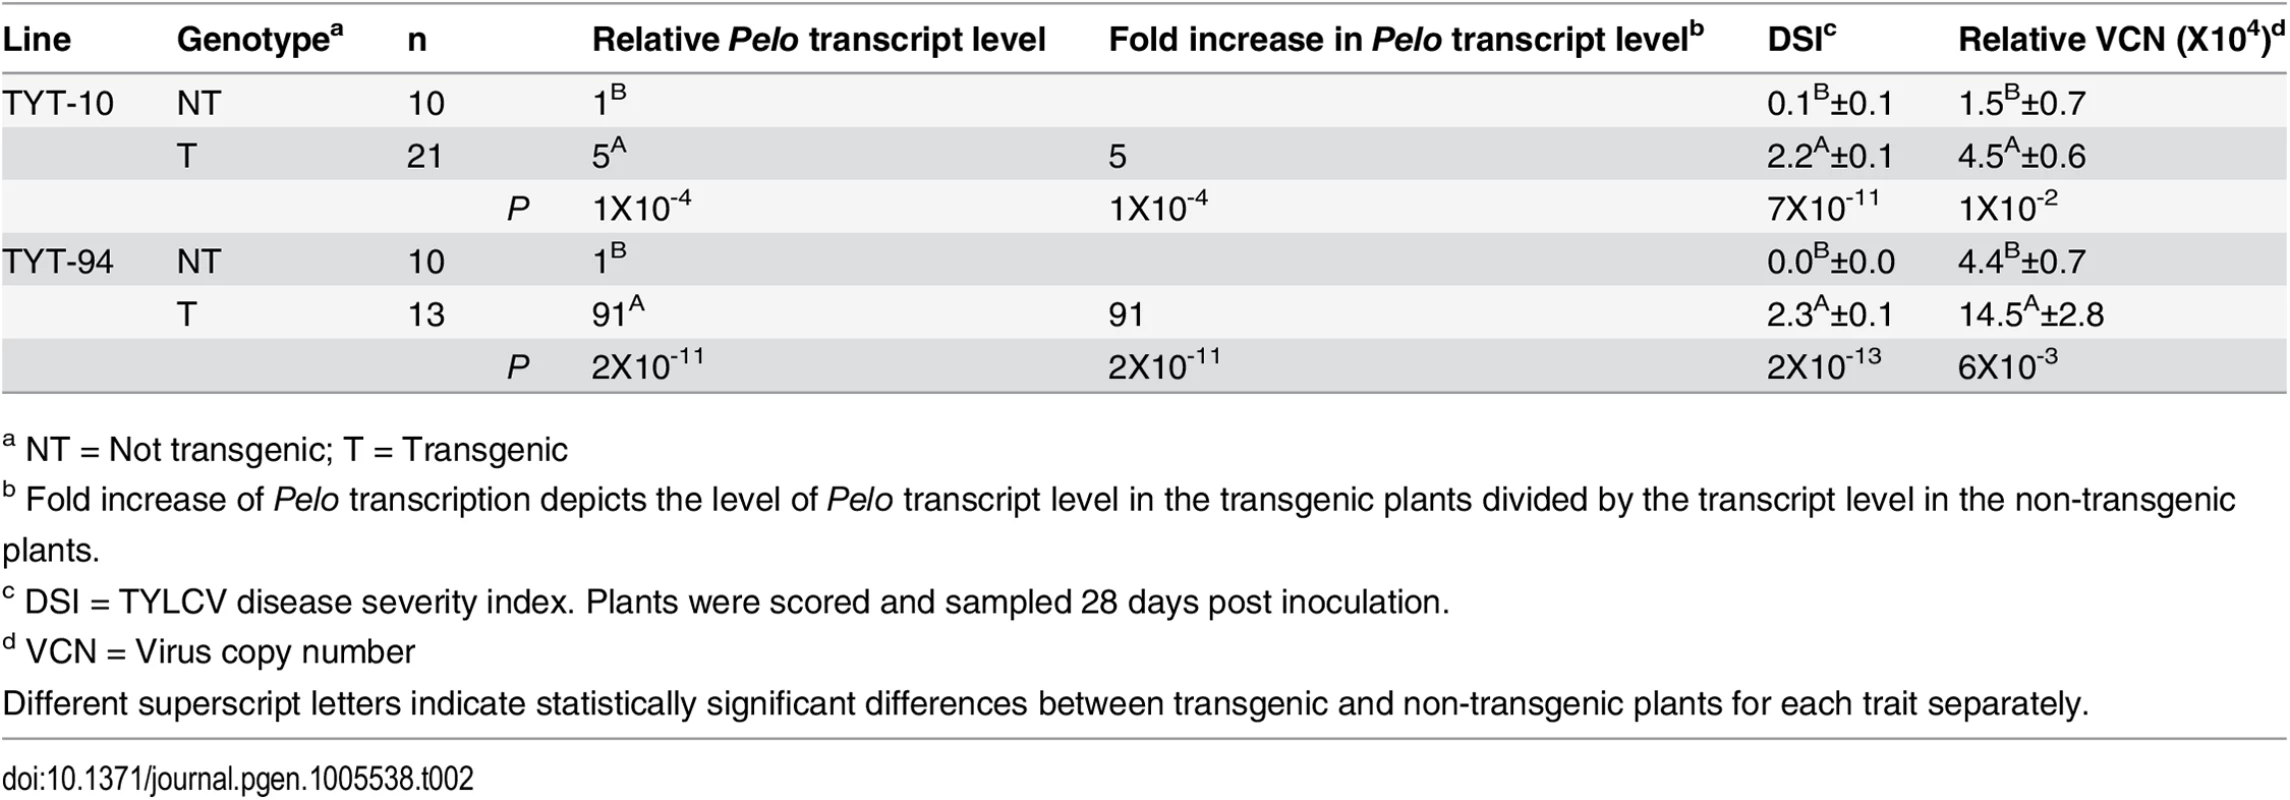 Effect of over-expressing the <i>Pelo</i> allele from M-82 plants in transgenic TY172 plants.